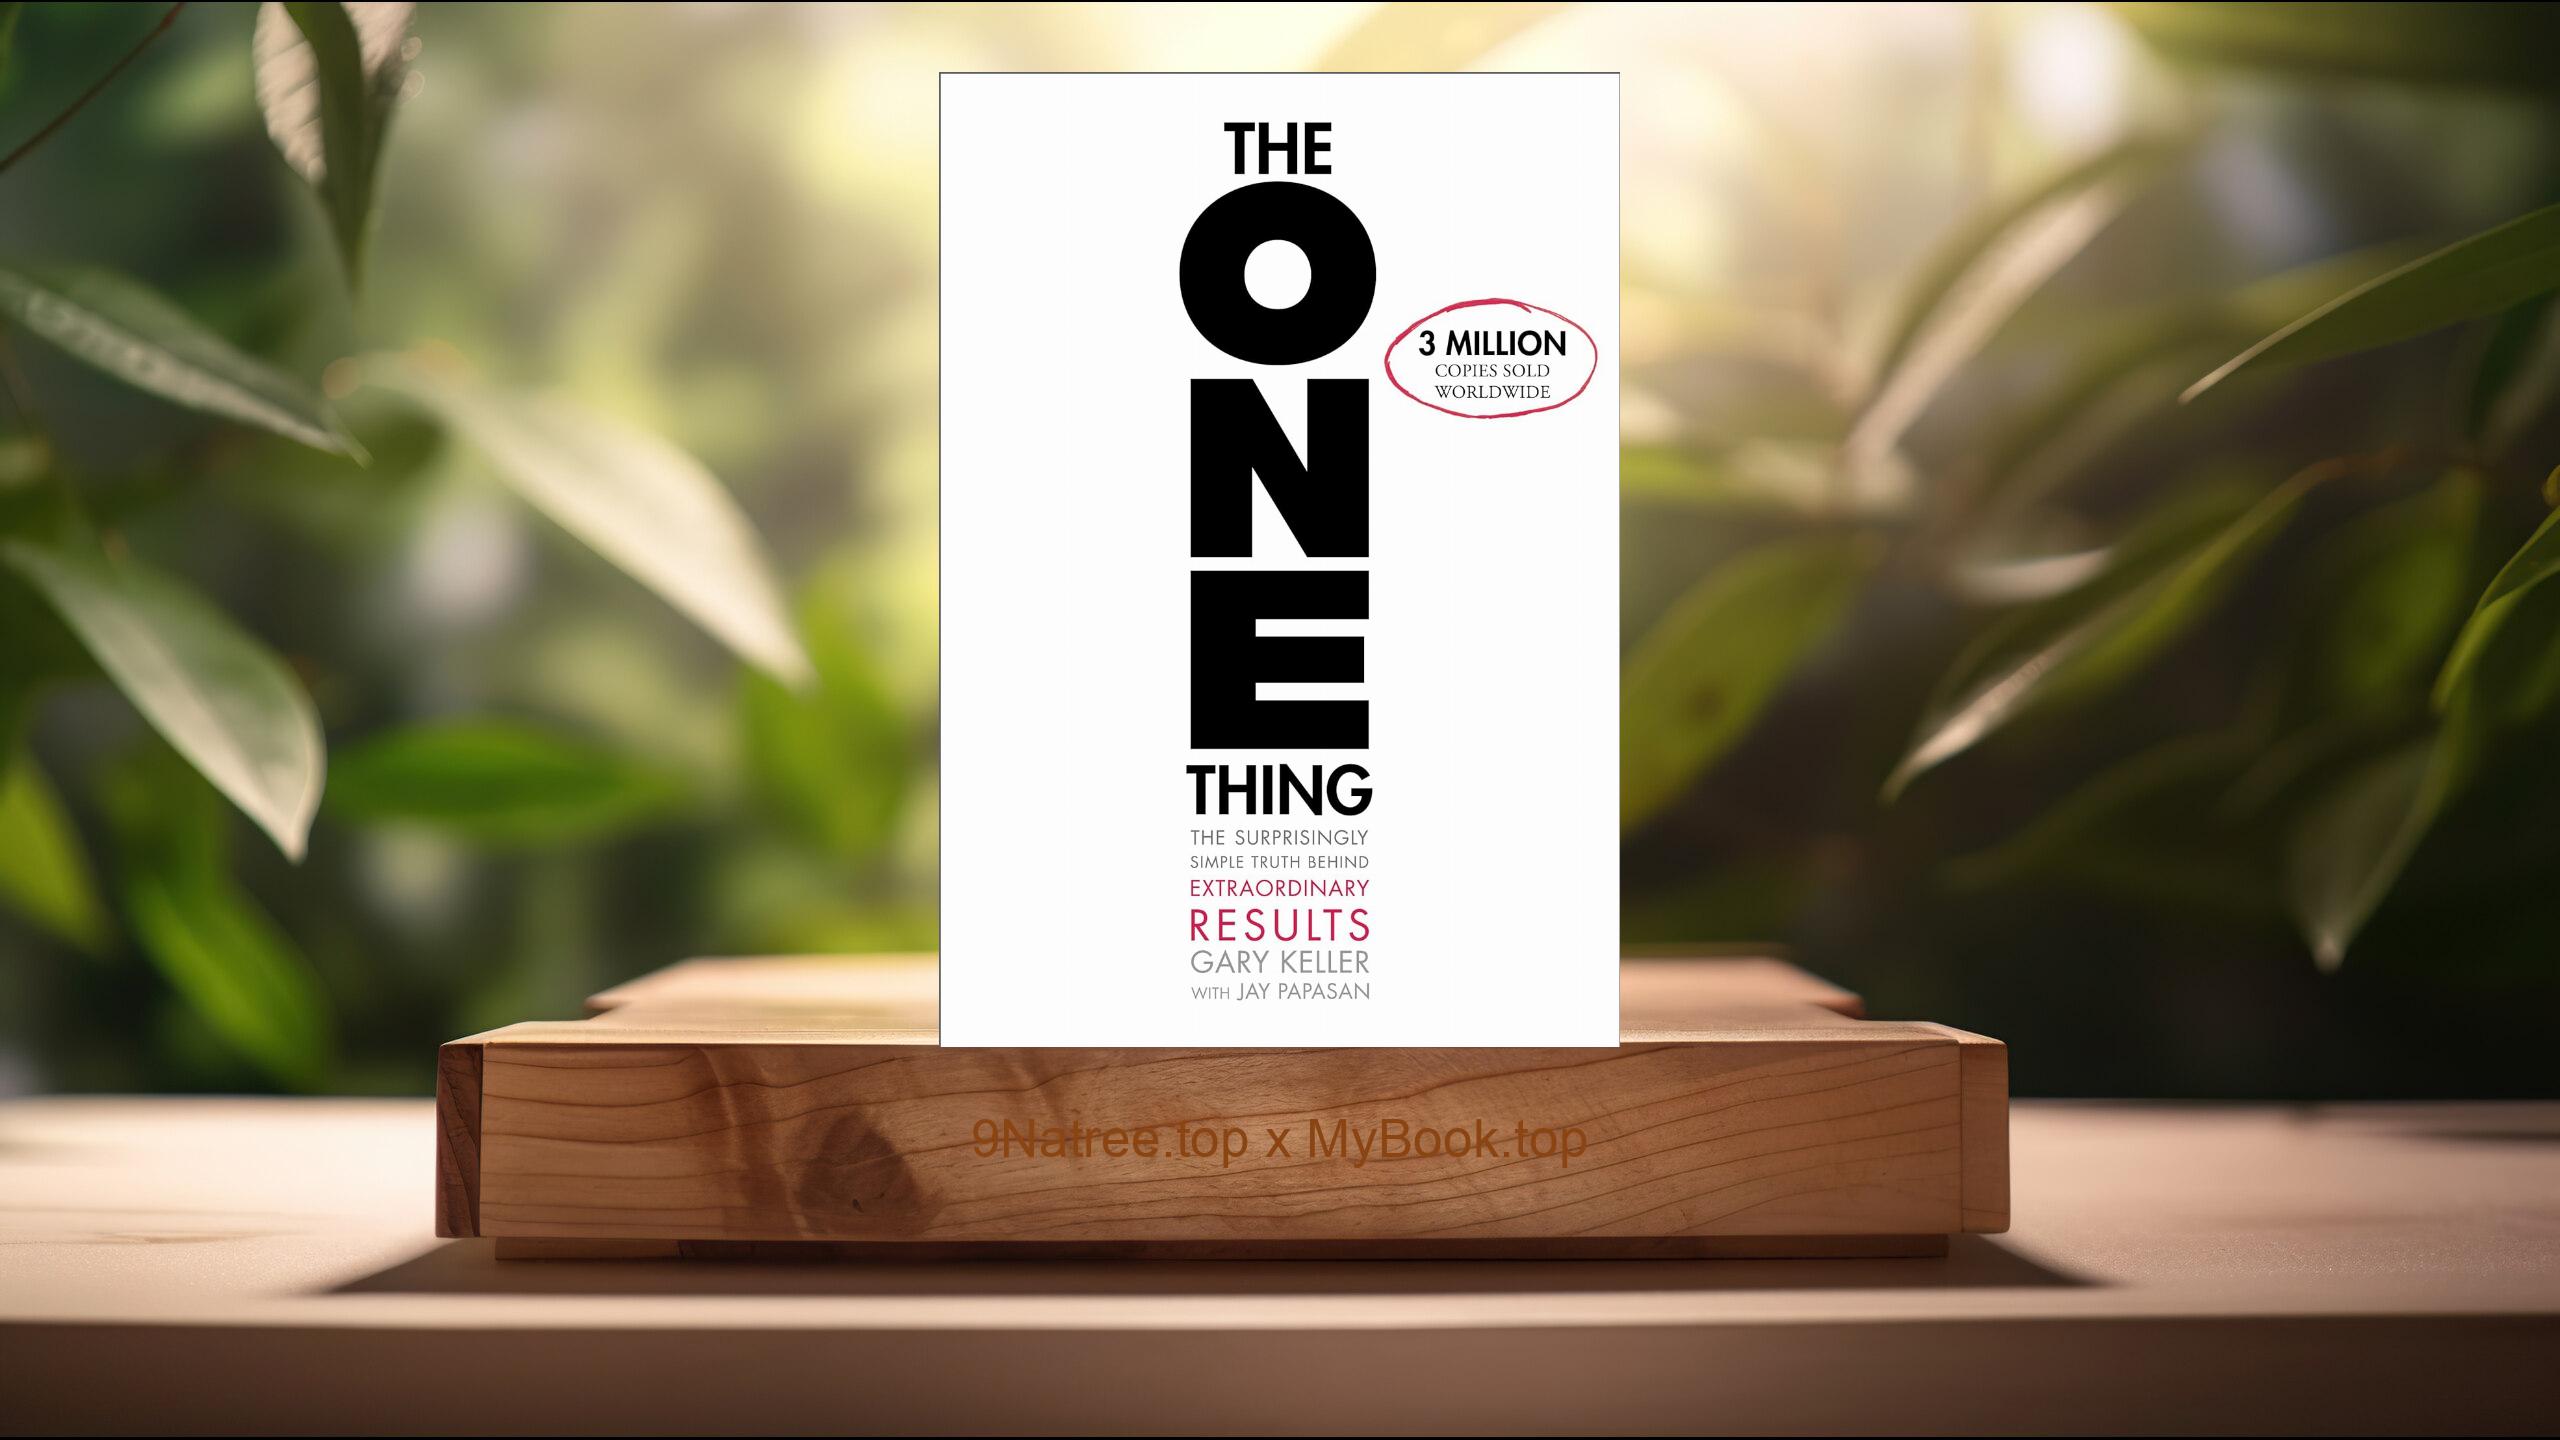 [Review] The ONE Thing: The Surprisingly Simple Truth About Extraordinary Results (Gary Keller) Summarized